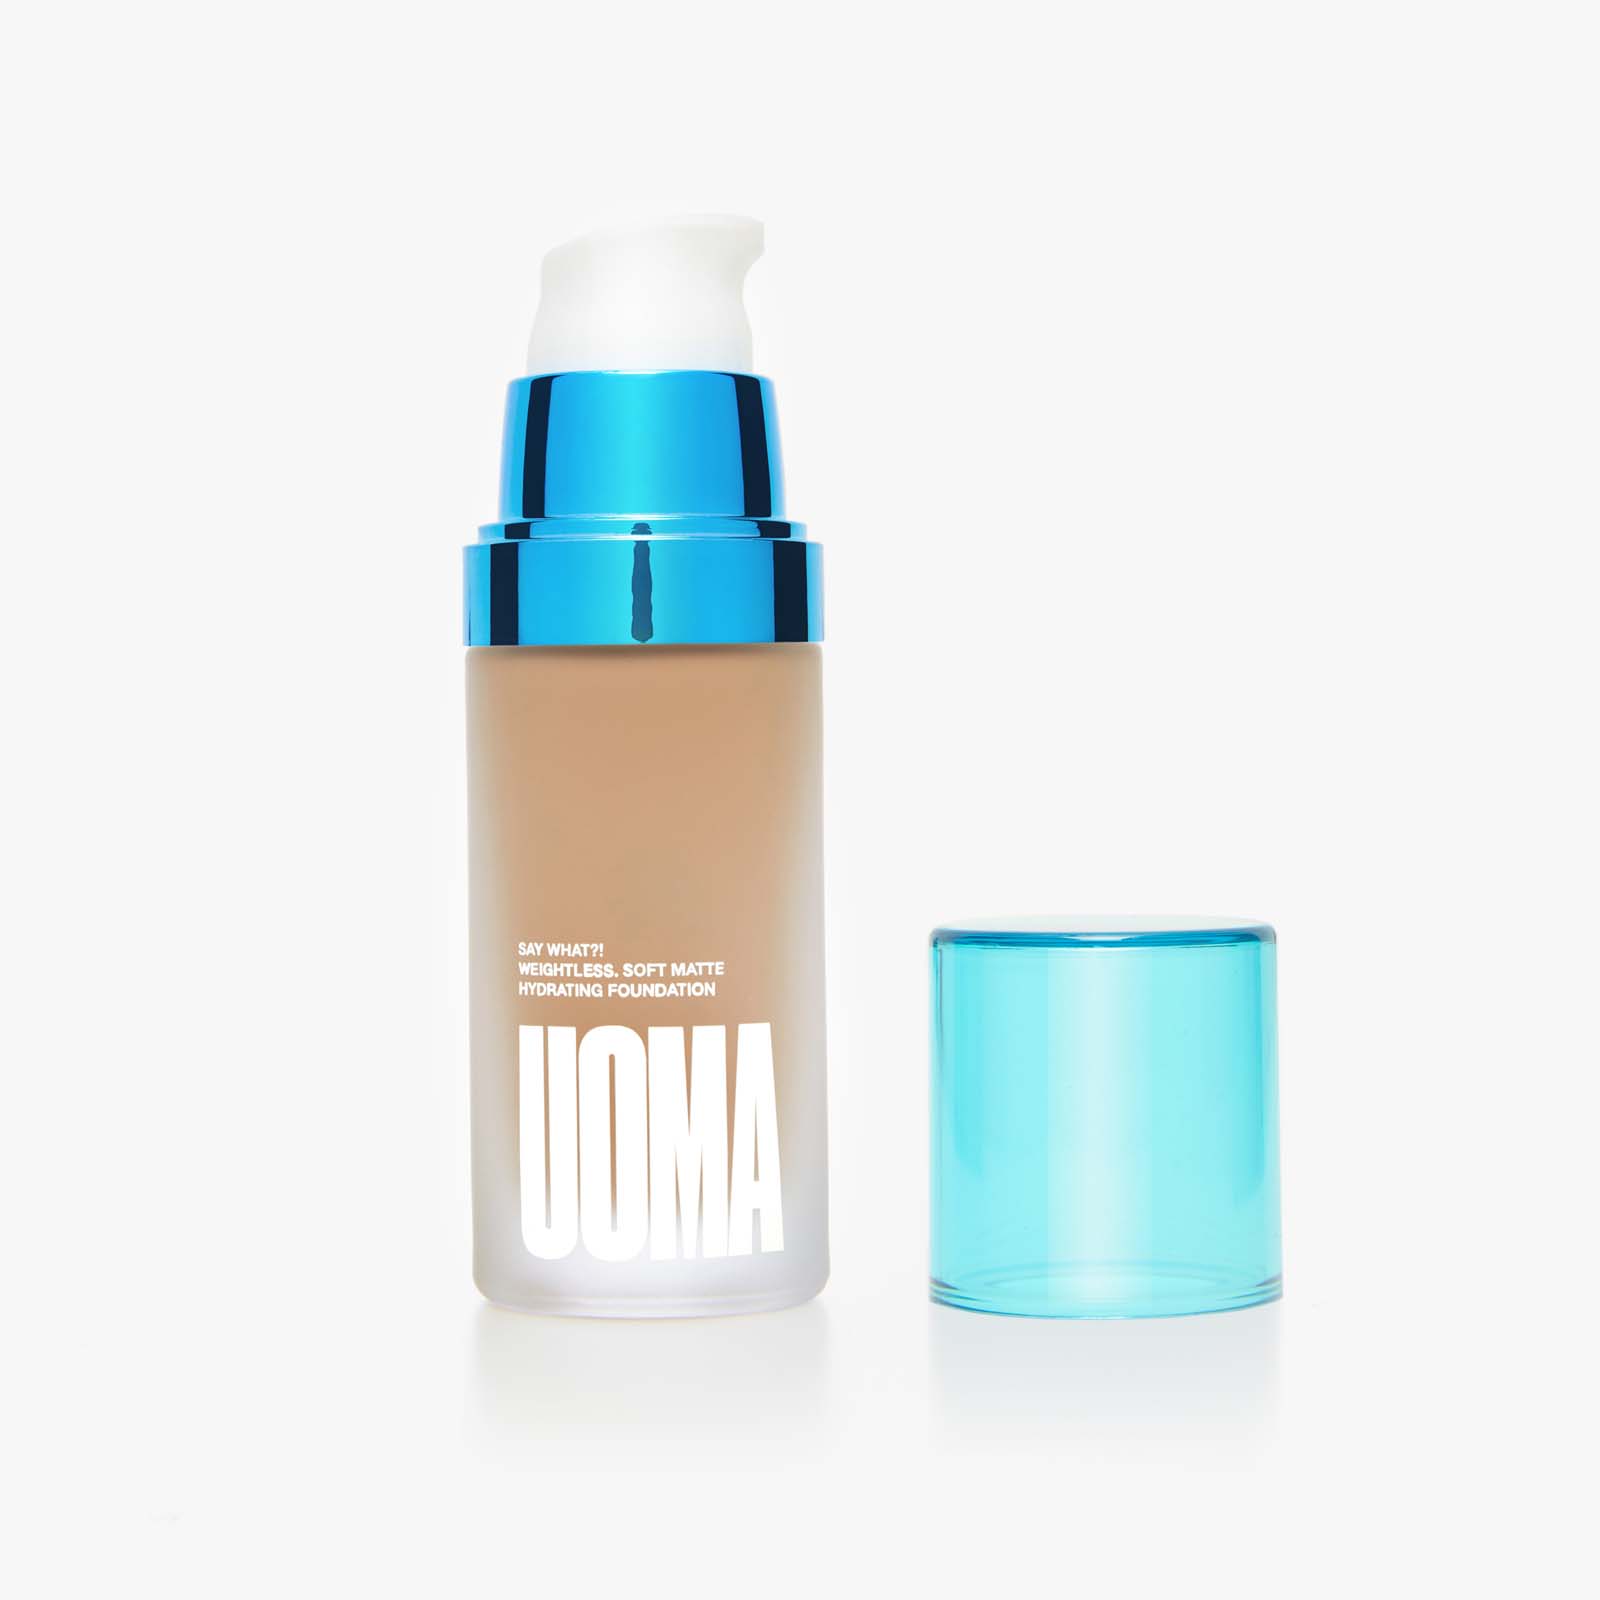 Uoma Beauty Say What?! Weightless Soft Matte Hydrating Foundation 30Ml Fair Lady T3N